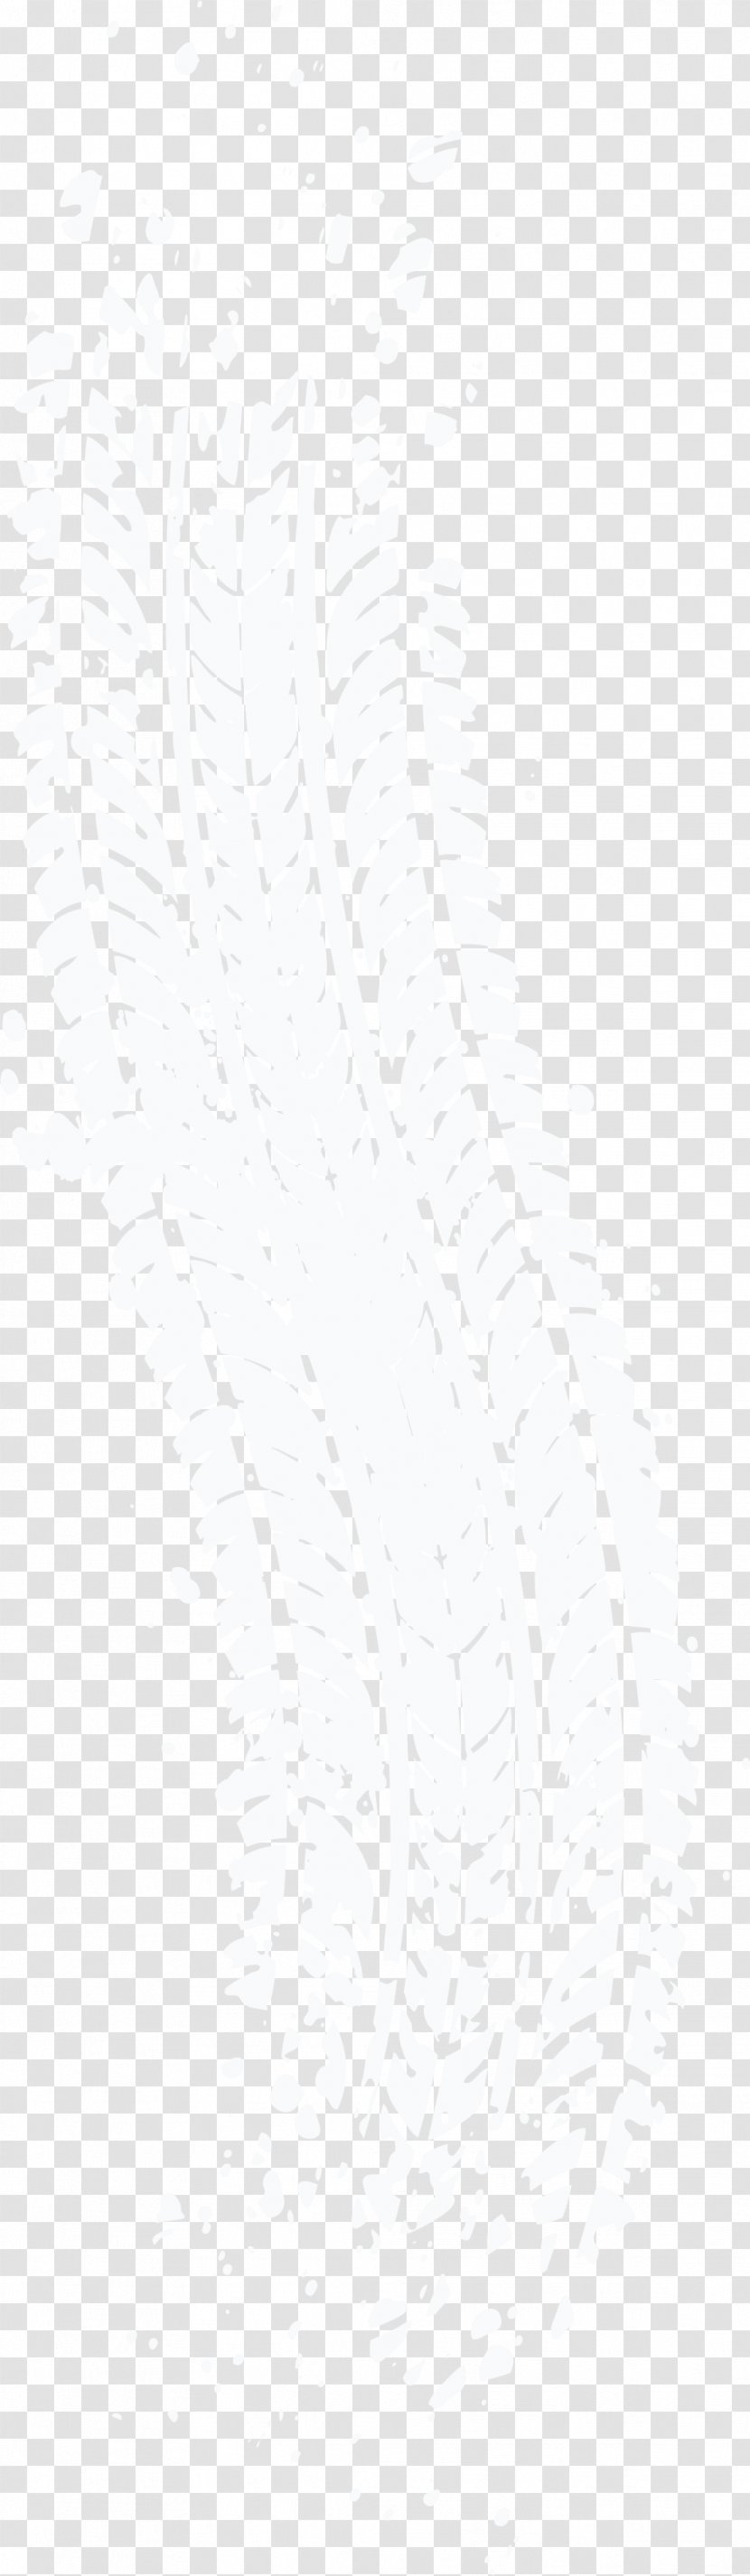 Photography Light White Wedding - Tyre Tracks Transparent PNG